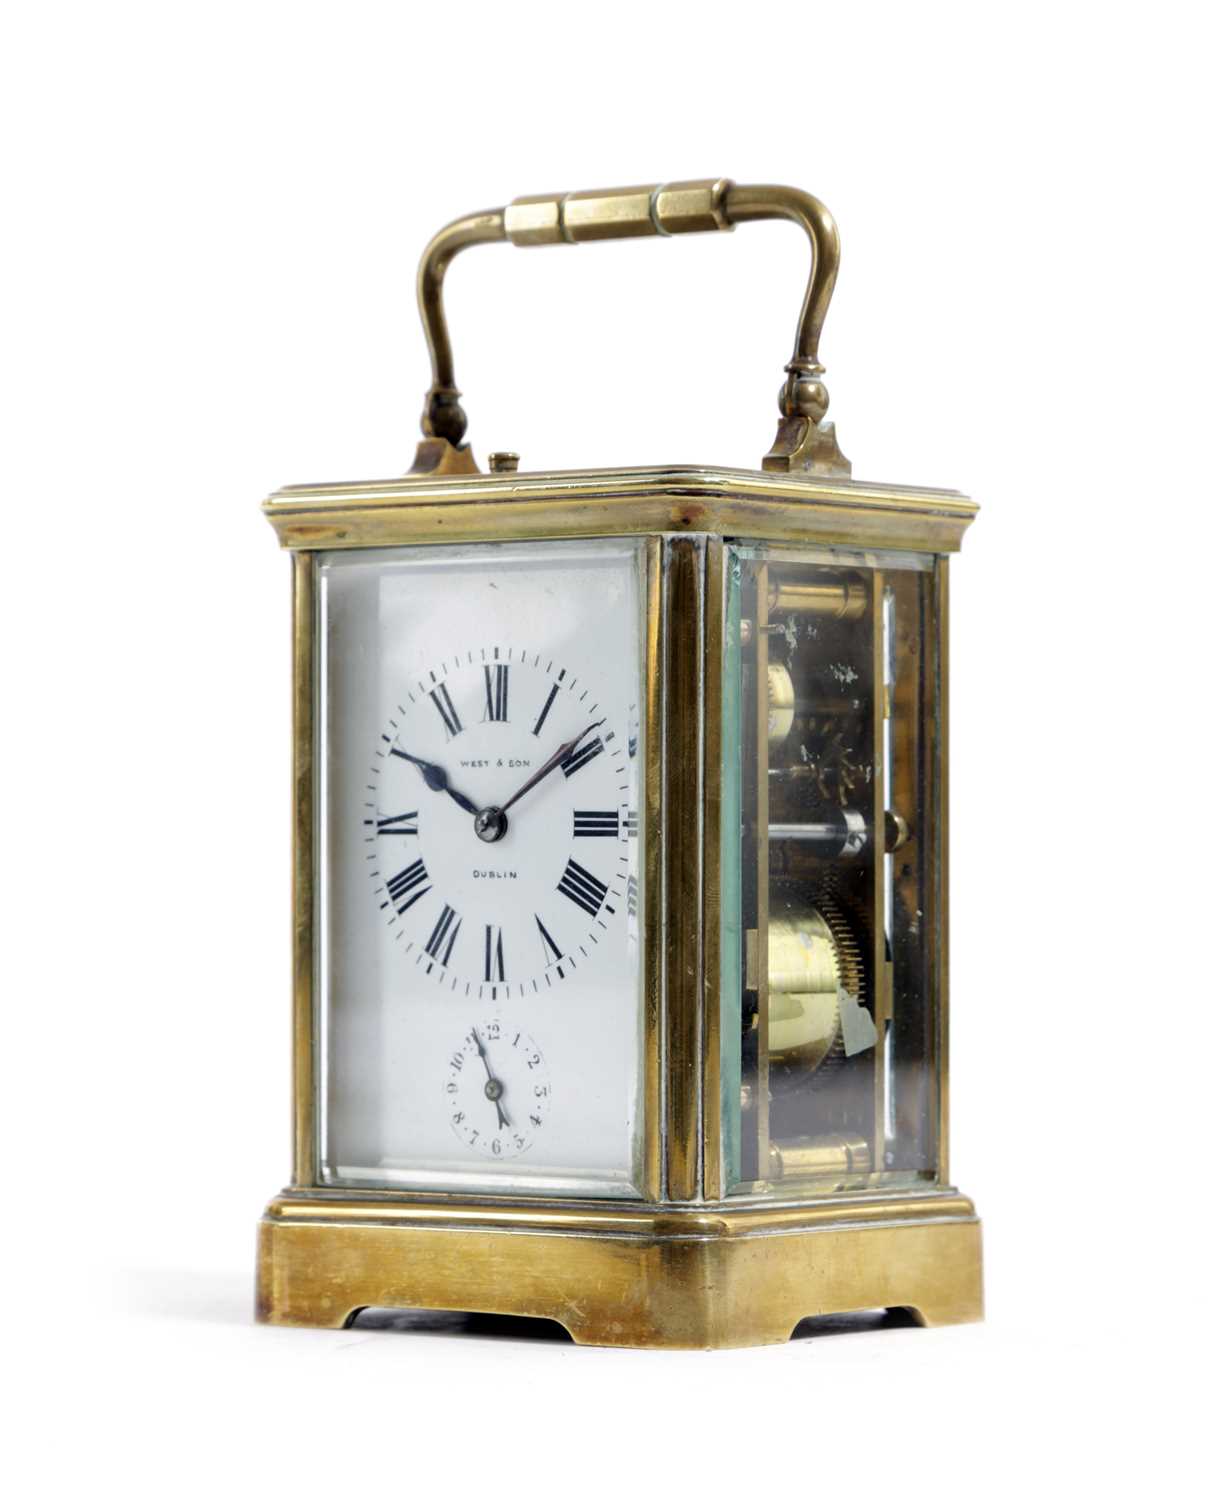 A FRENCH BRASS CARRIAGE CLOCK LATE 19TH CENTURY the brass eight day movement with a platform lever